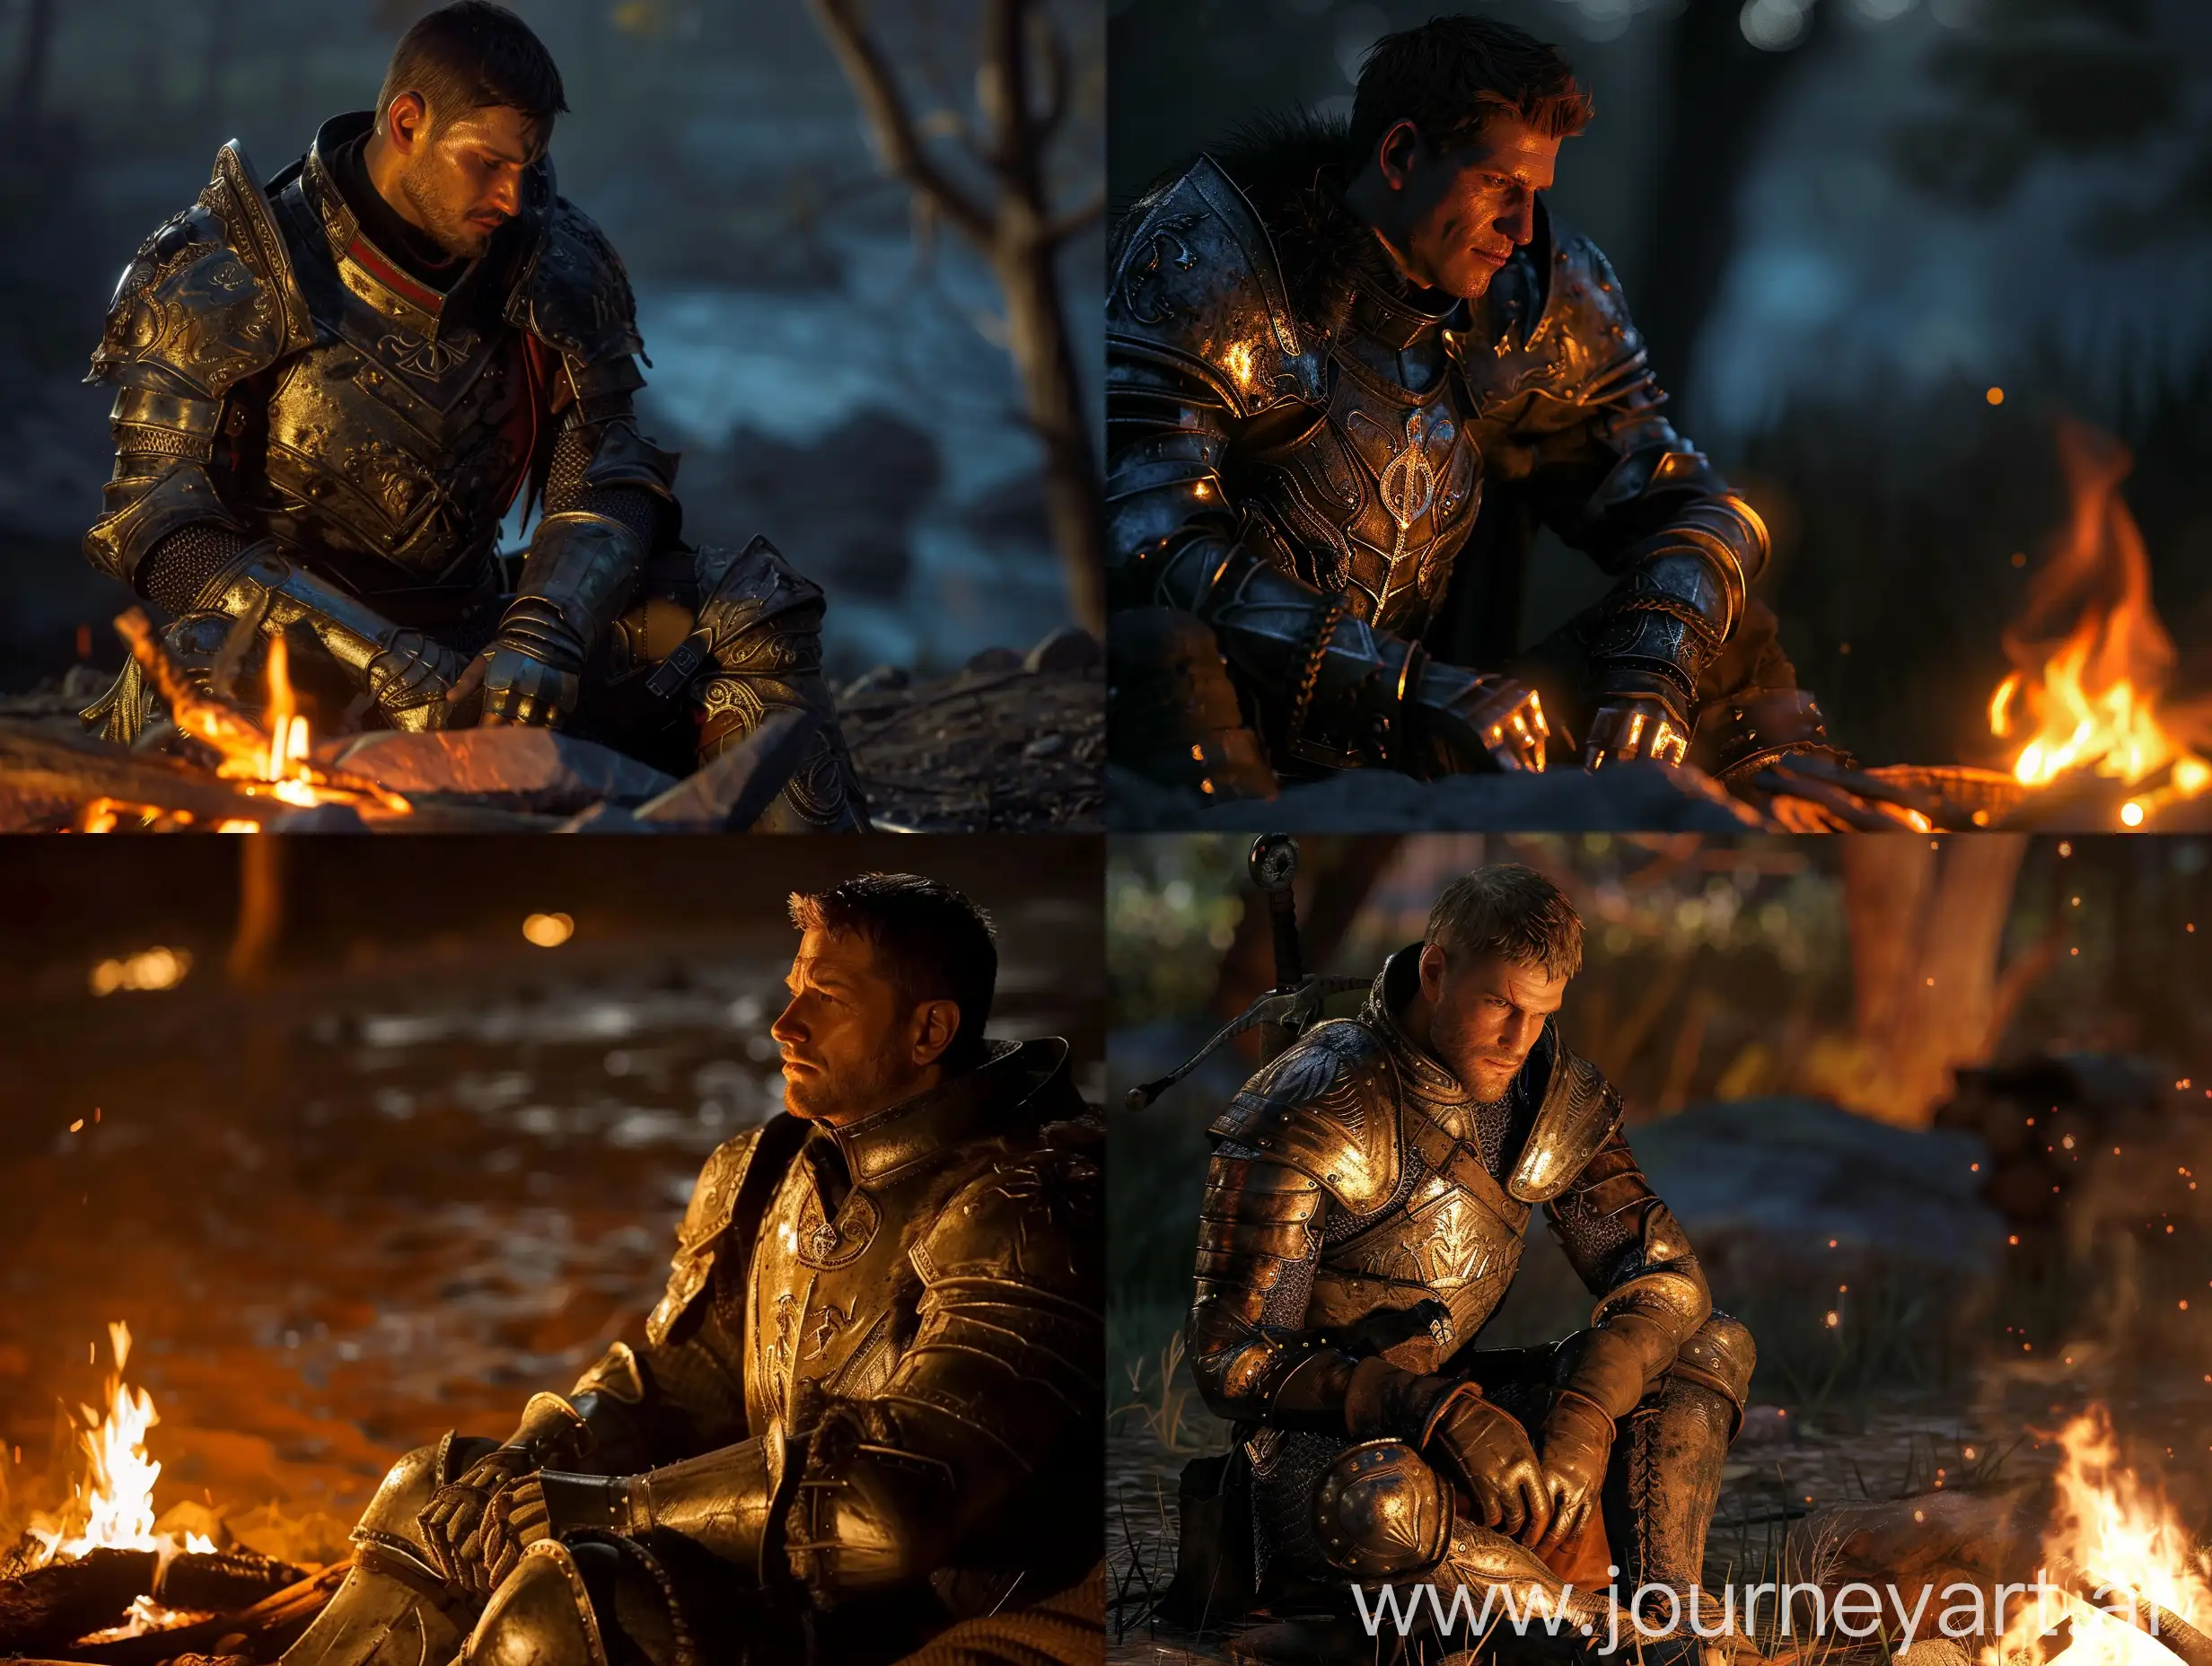 Medieval-Warrior-Alistair-Theron-Rests-by-Campfire